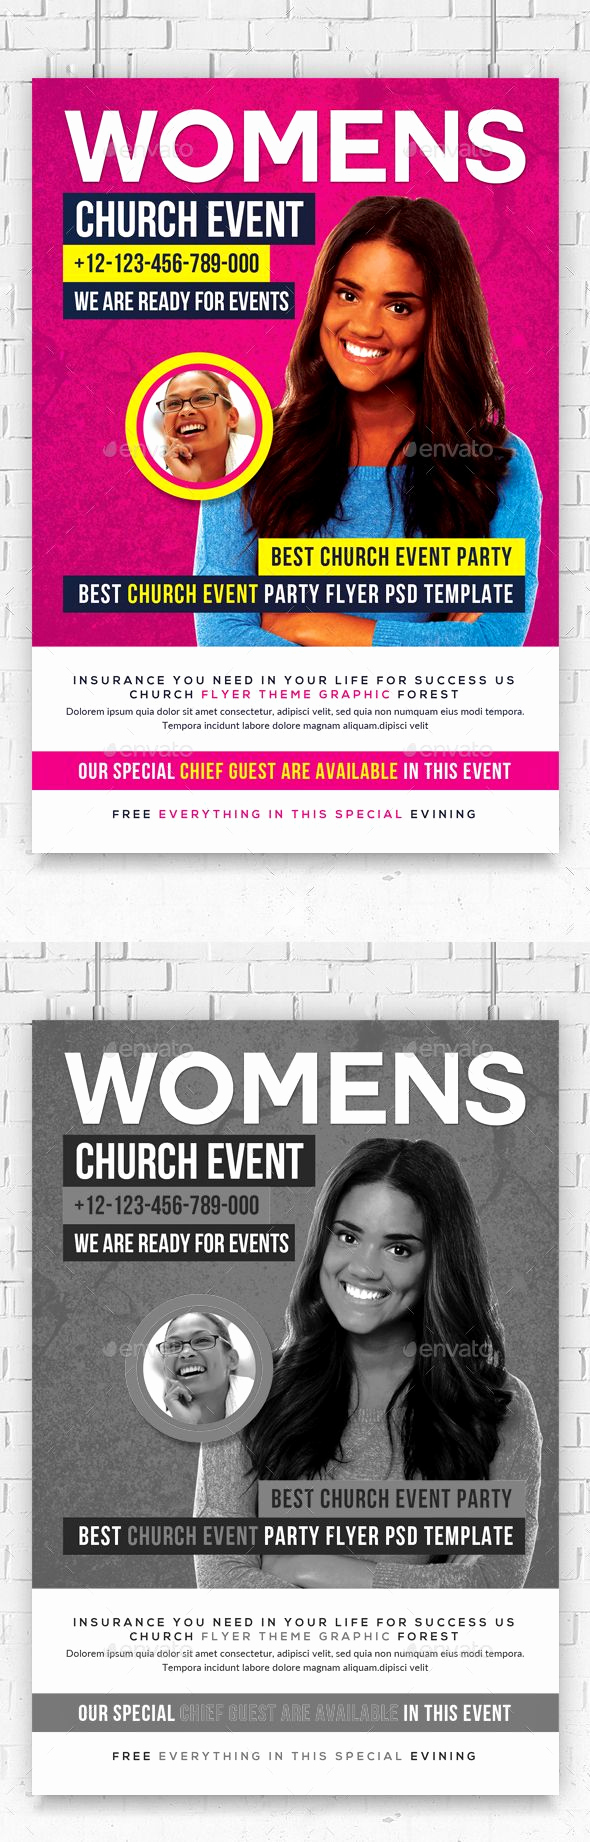 Free Church Flyer Templates Unique 256 Best Images About Media On Pinterest